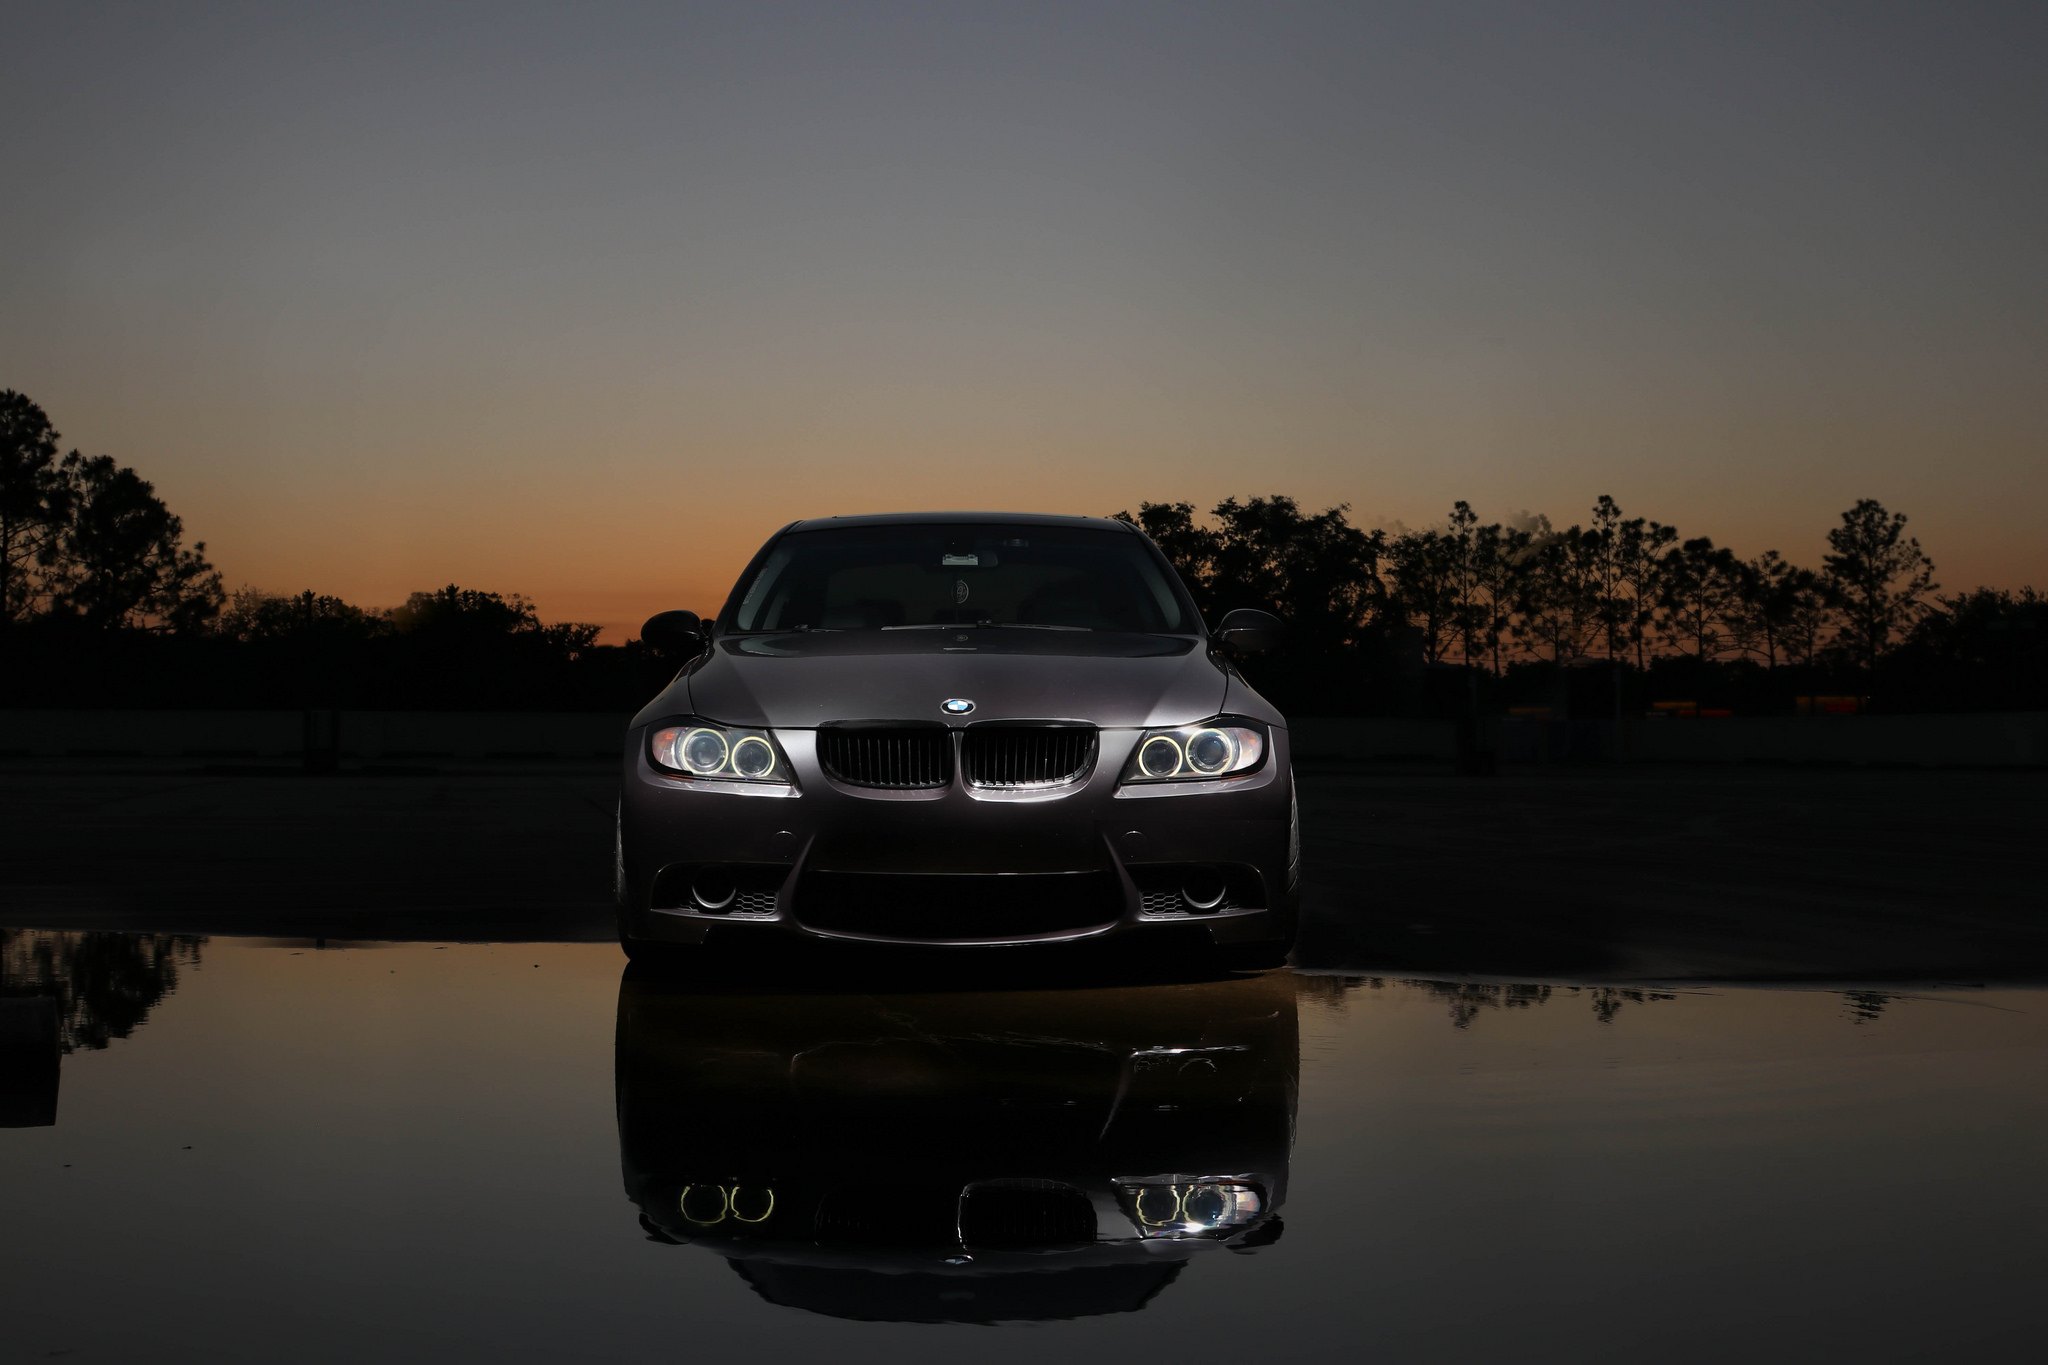 Front Bumper with Fog Lights on Gray BMW 3-Series - Photo by VIBE Motorsports